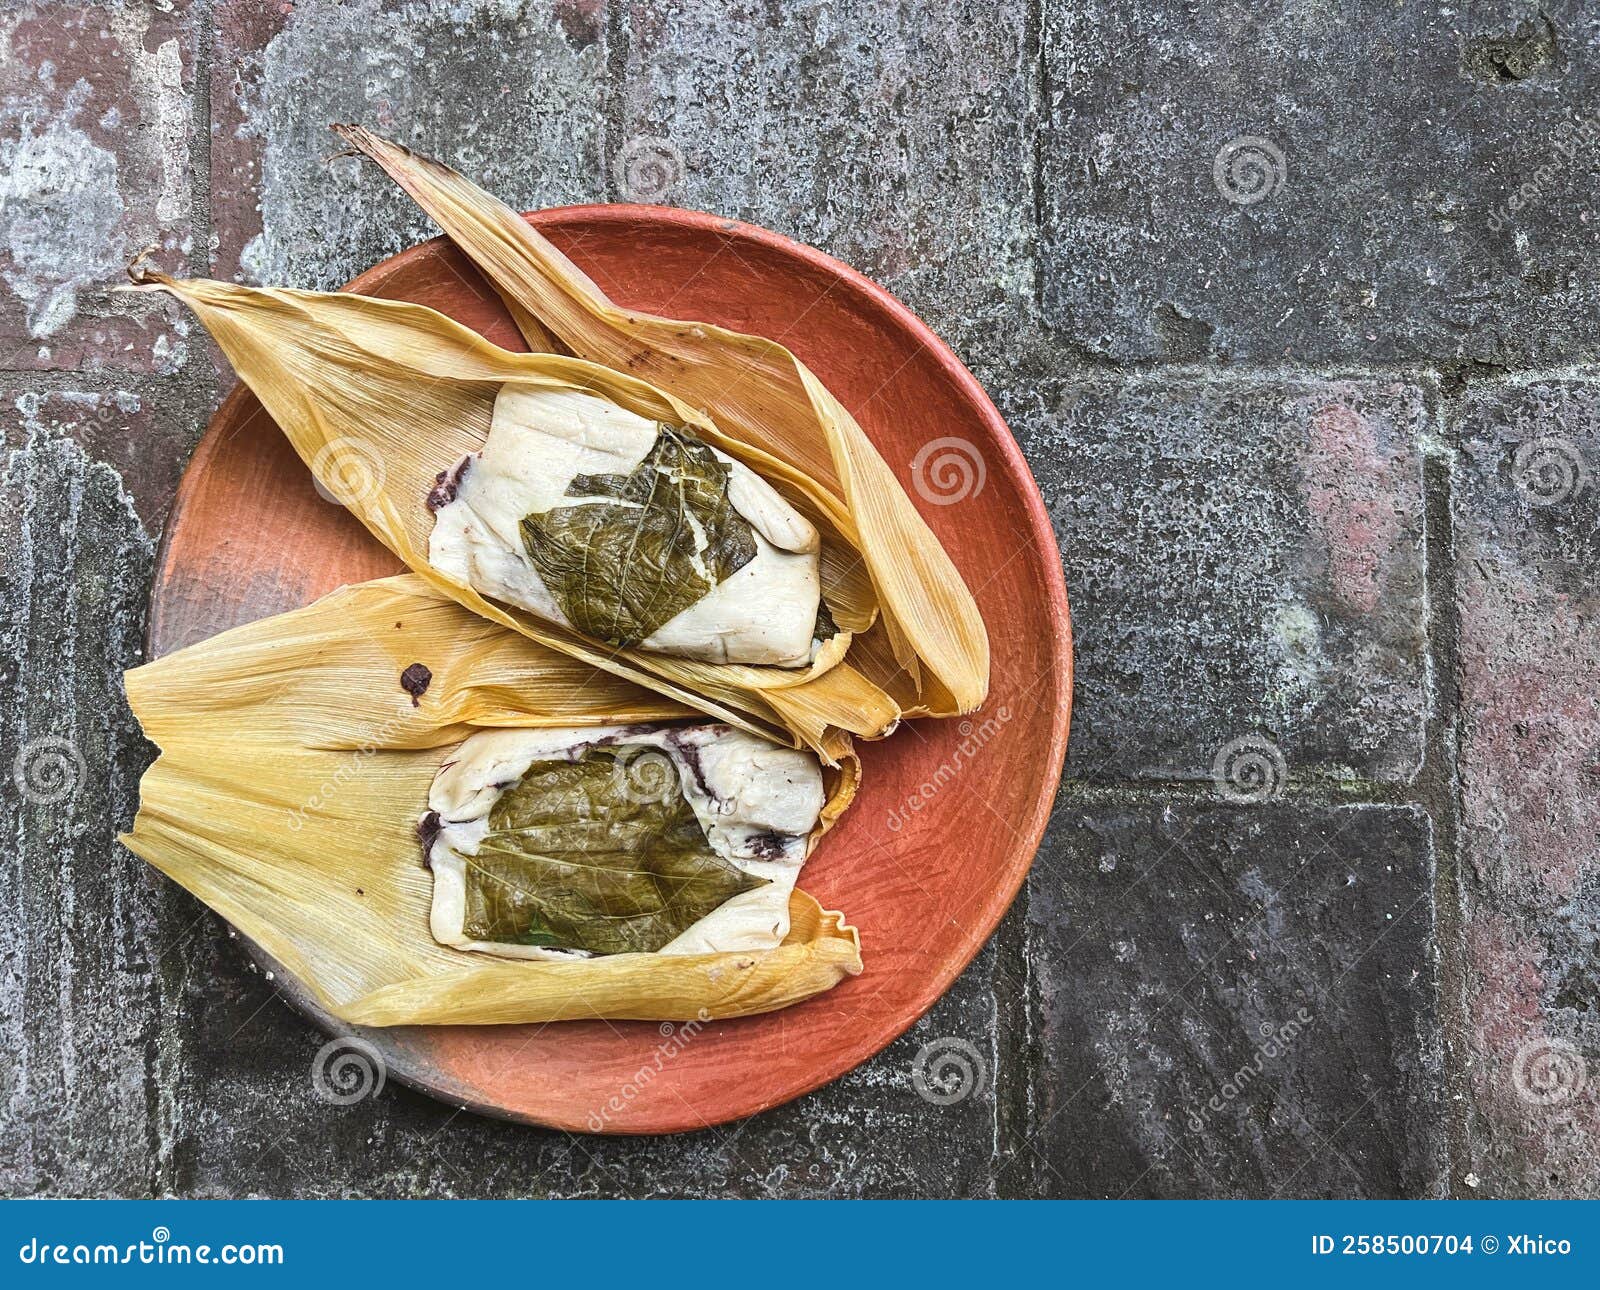 two oaxacan tamales with hoja santa wrapped on the outside of the masa